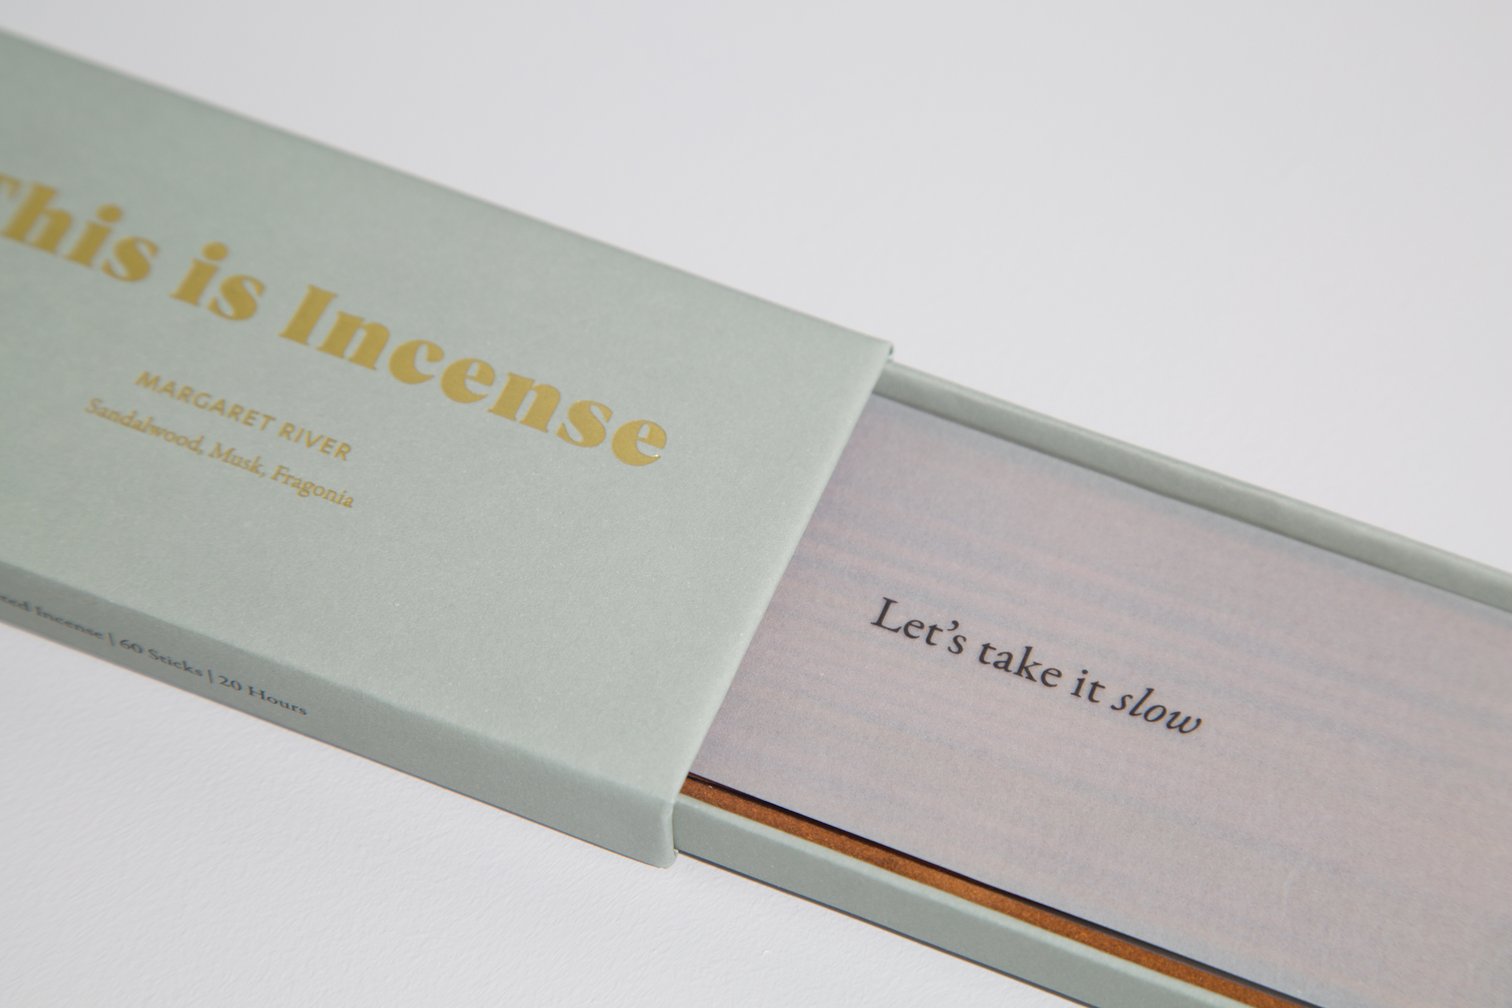 This is Incense // Margaret River